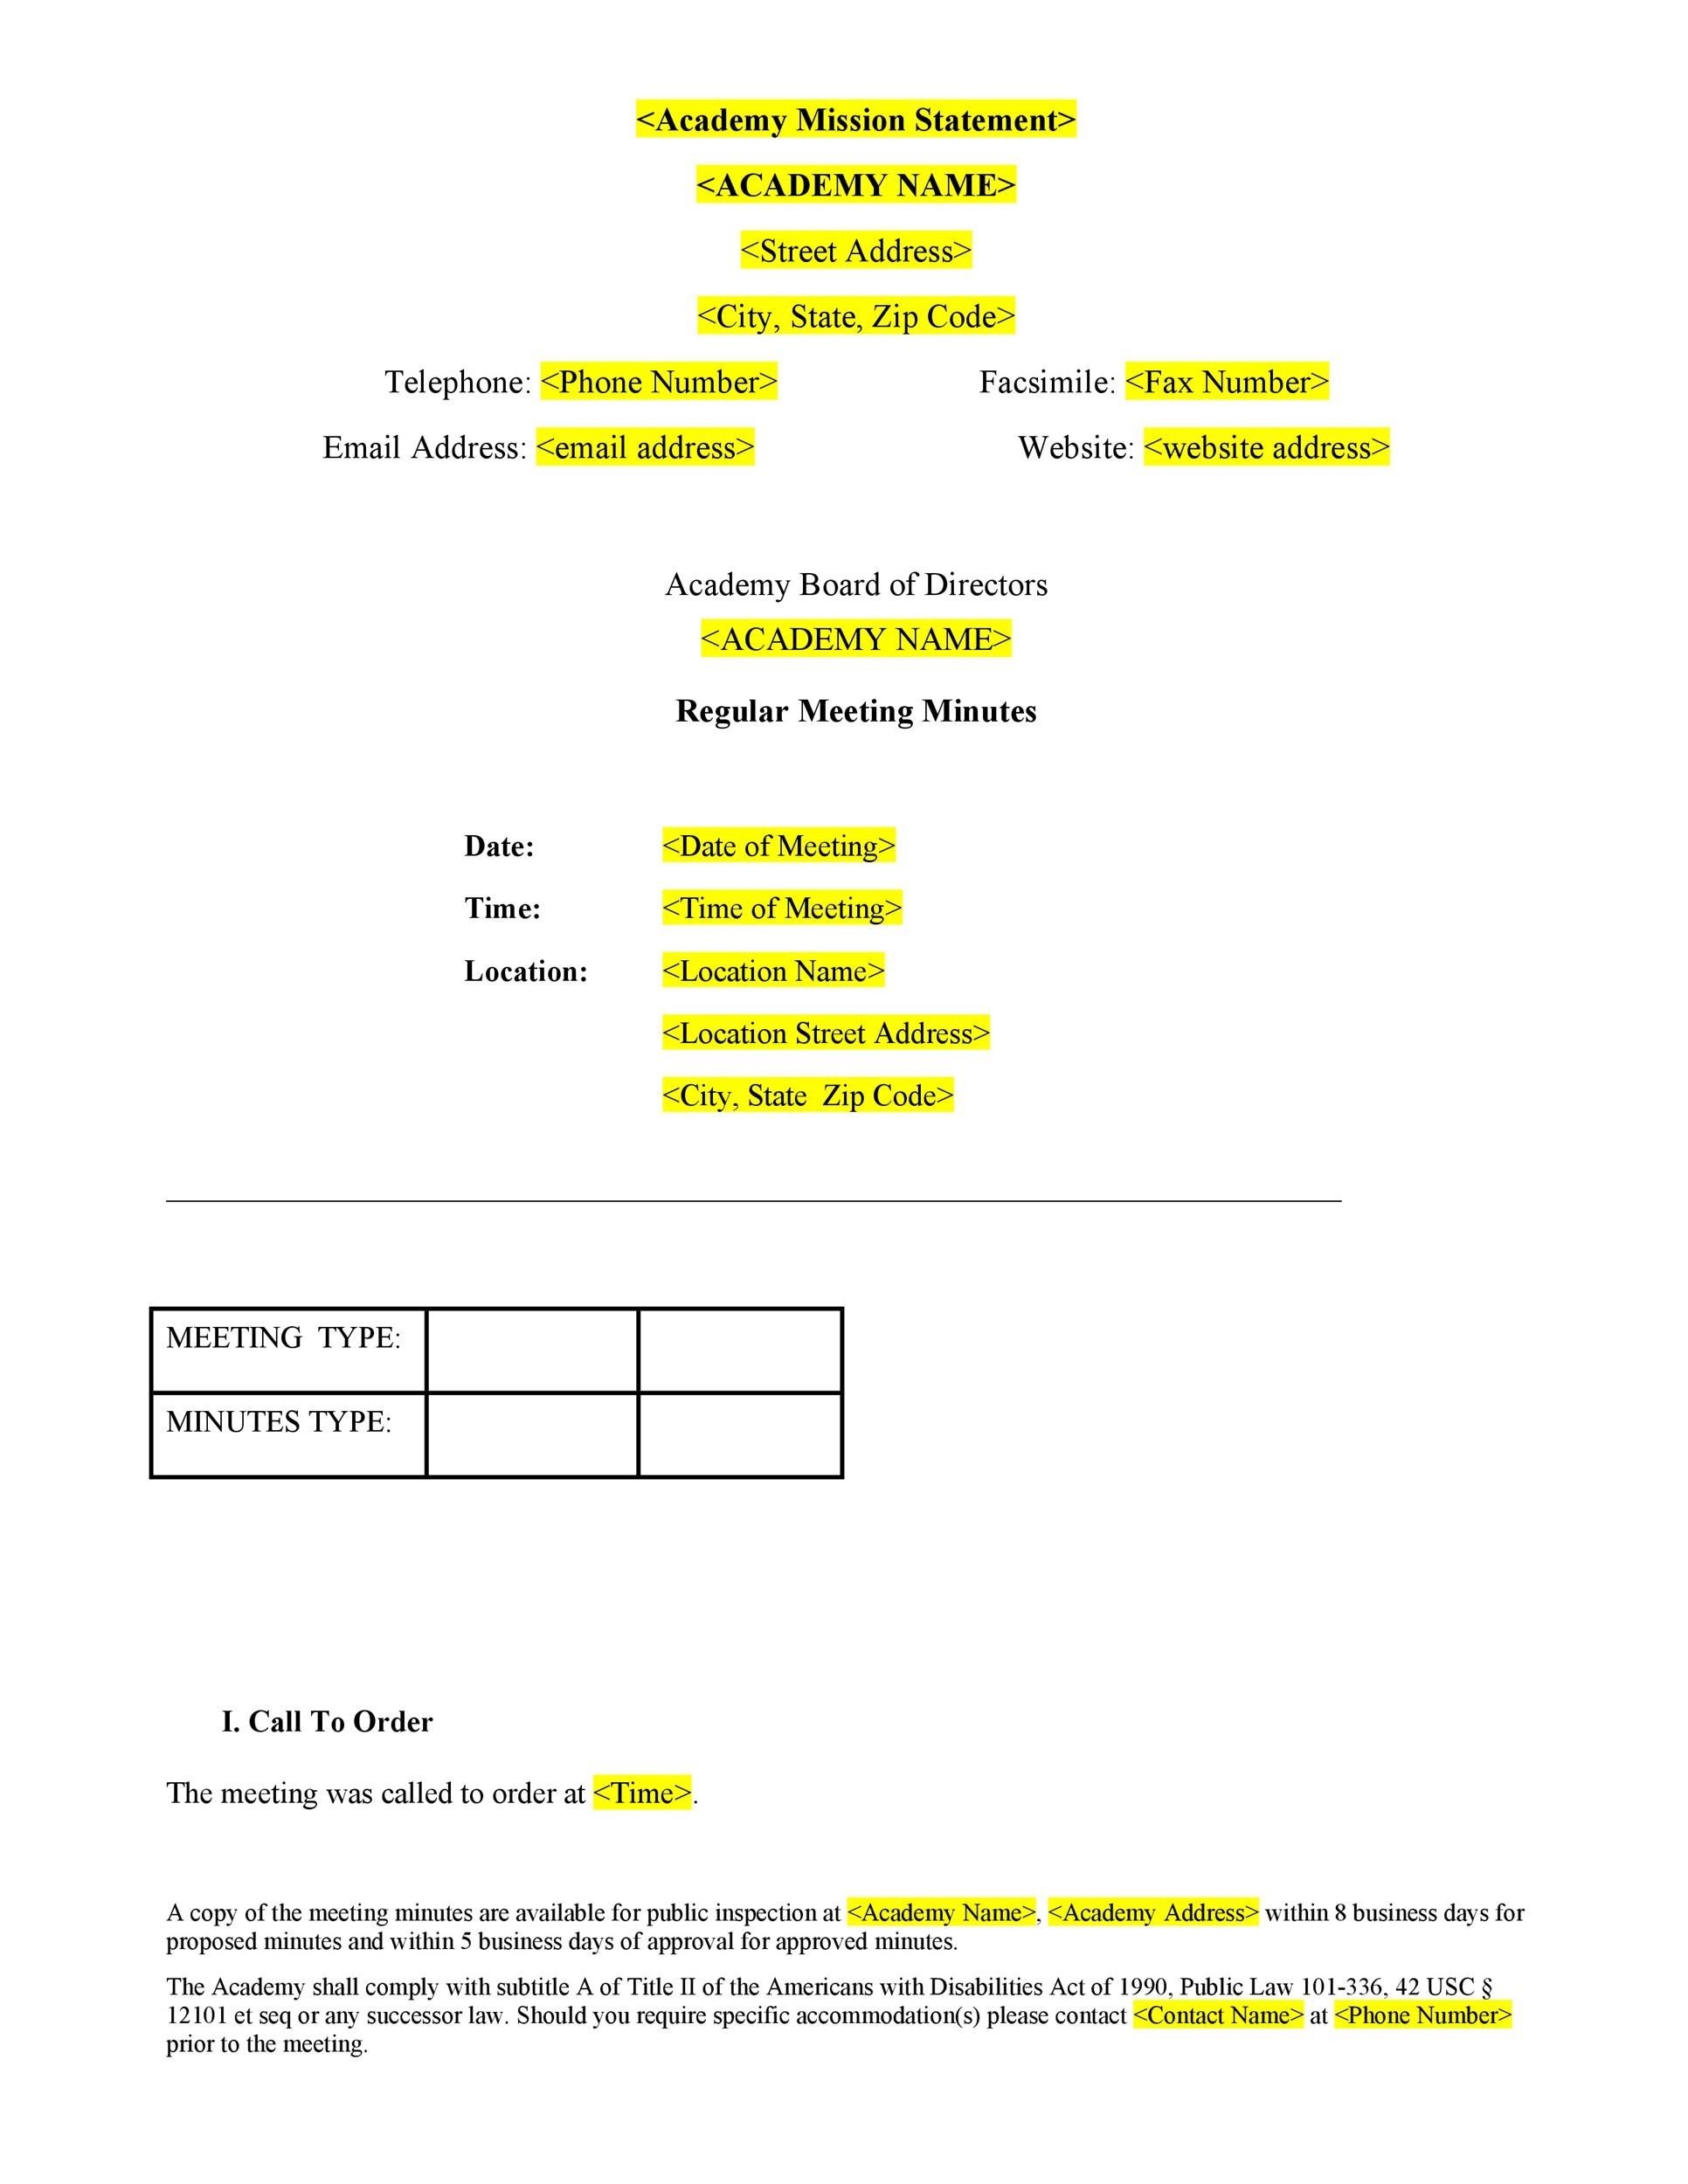 20 Handy Meeting Minutes Meeting Notes Templates